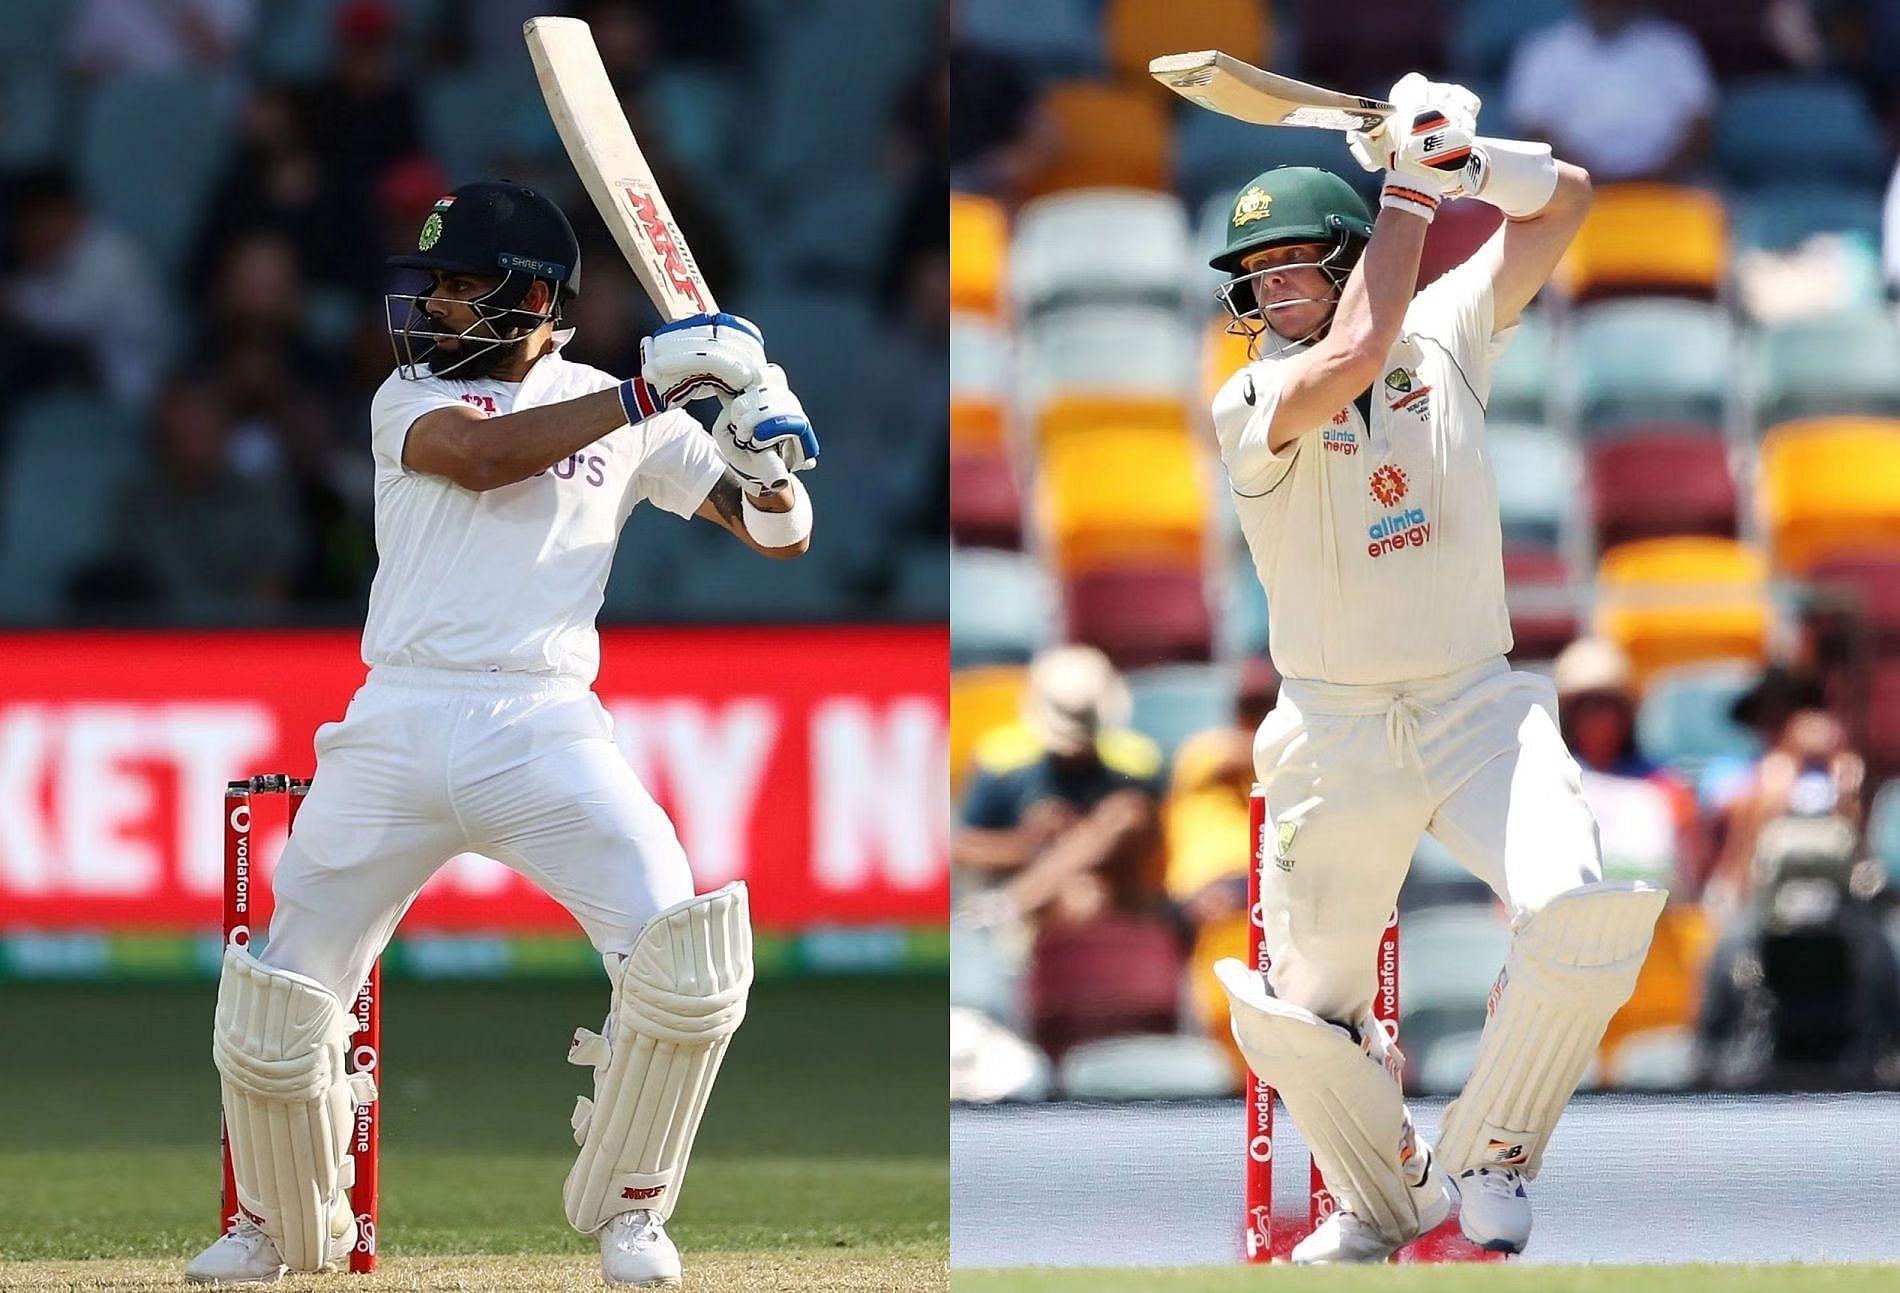 Virat Kohli and Steve Smith are considered two of the modern batting greats.